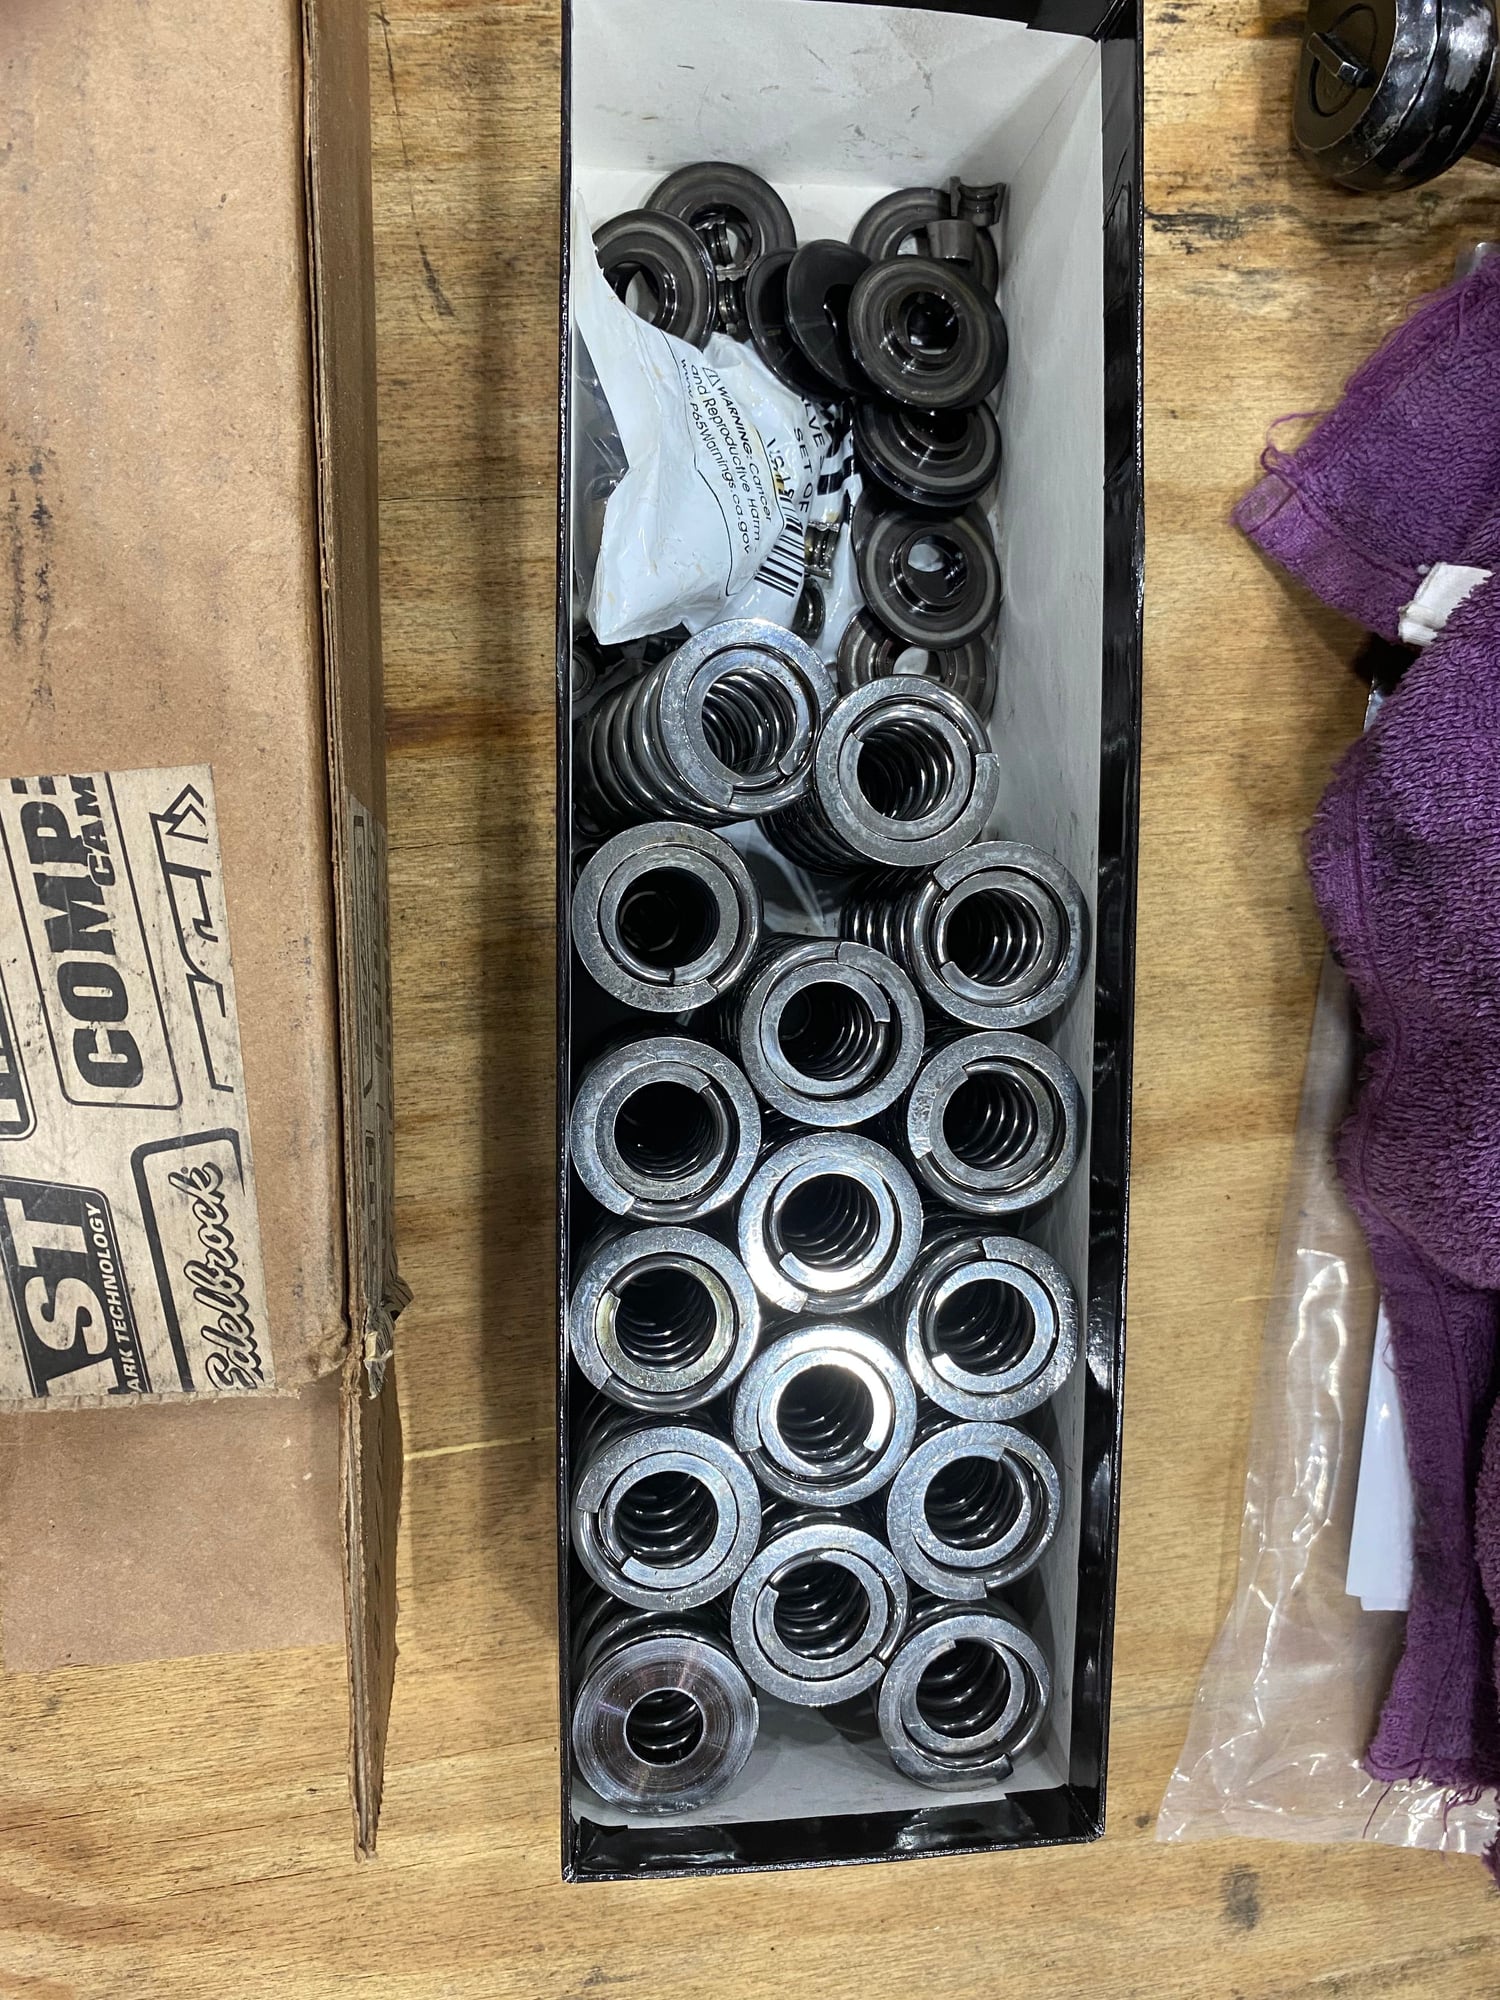 Engine - Internals - Ls3 custom nitrous cam and btr 660 spring kit 7.400 push rods - Used - 2004 to 2021 Any Make All Models - Hustonville, KY 40437, United States